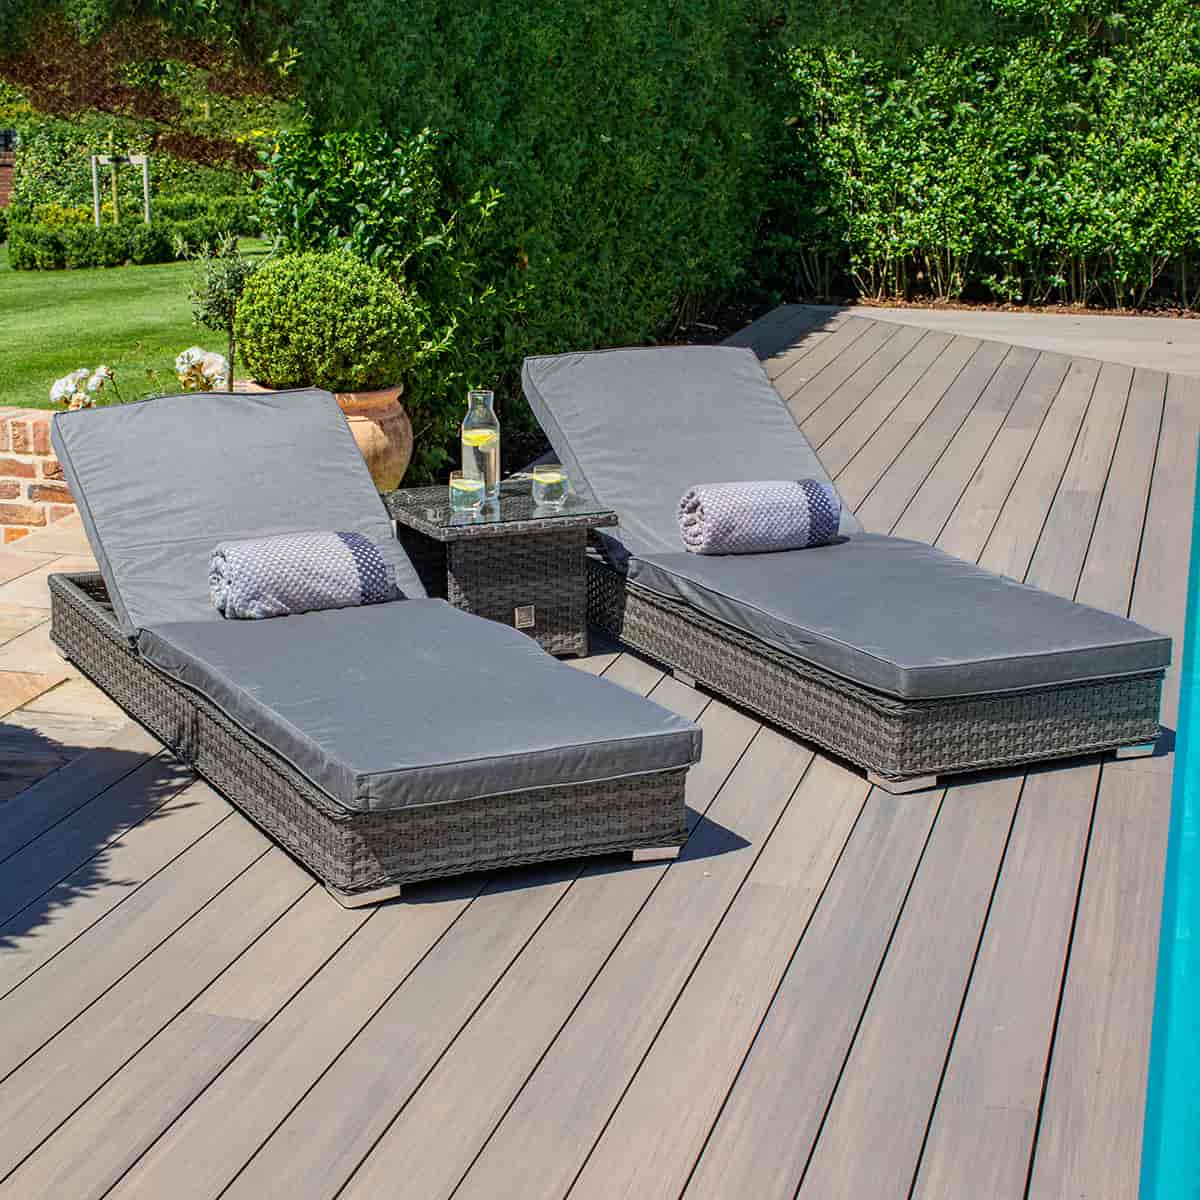 Grey rattan double sunlounger set with side table